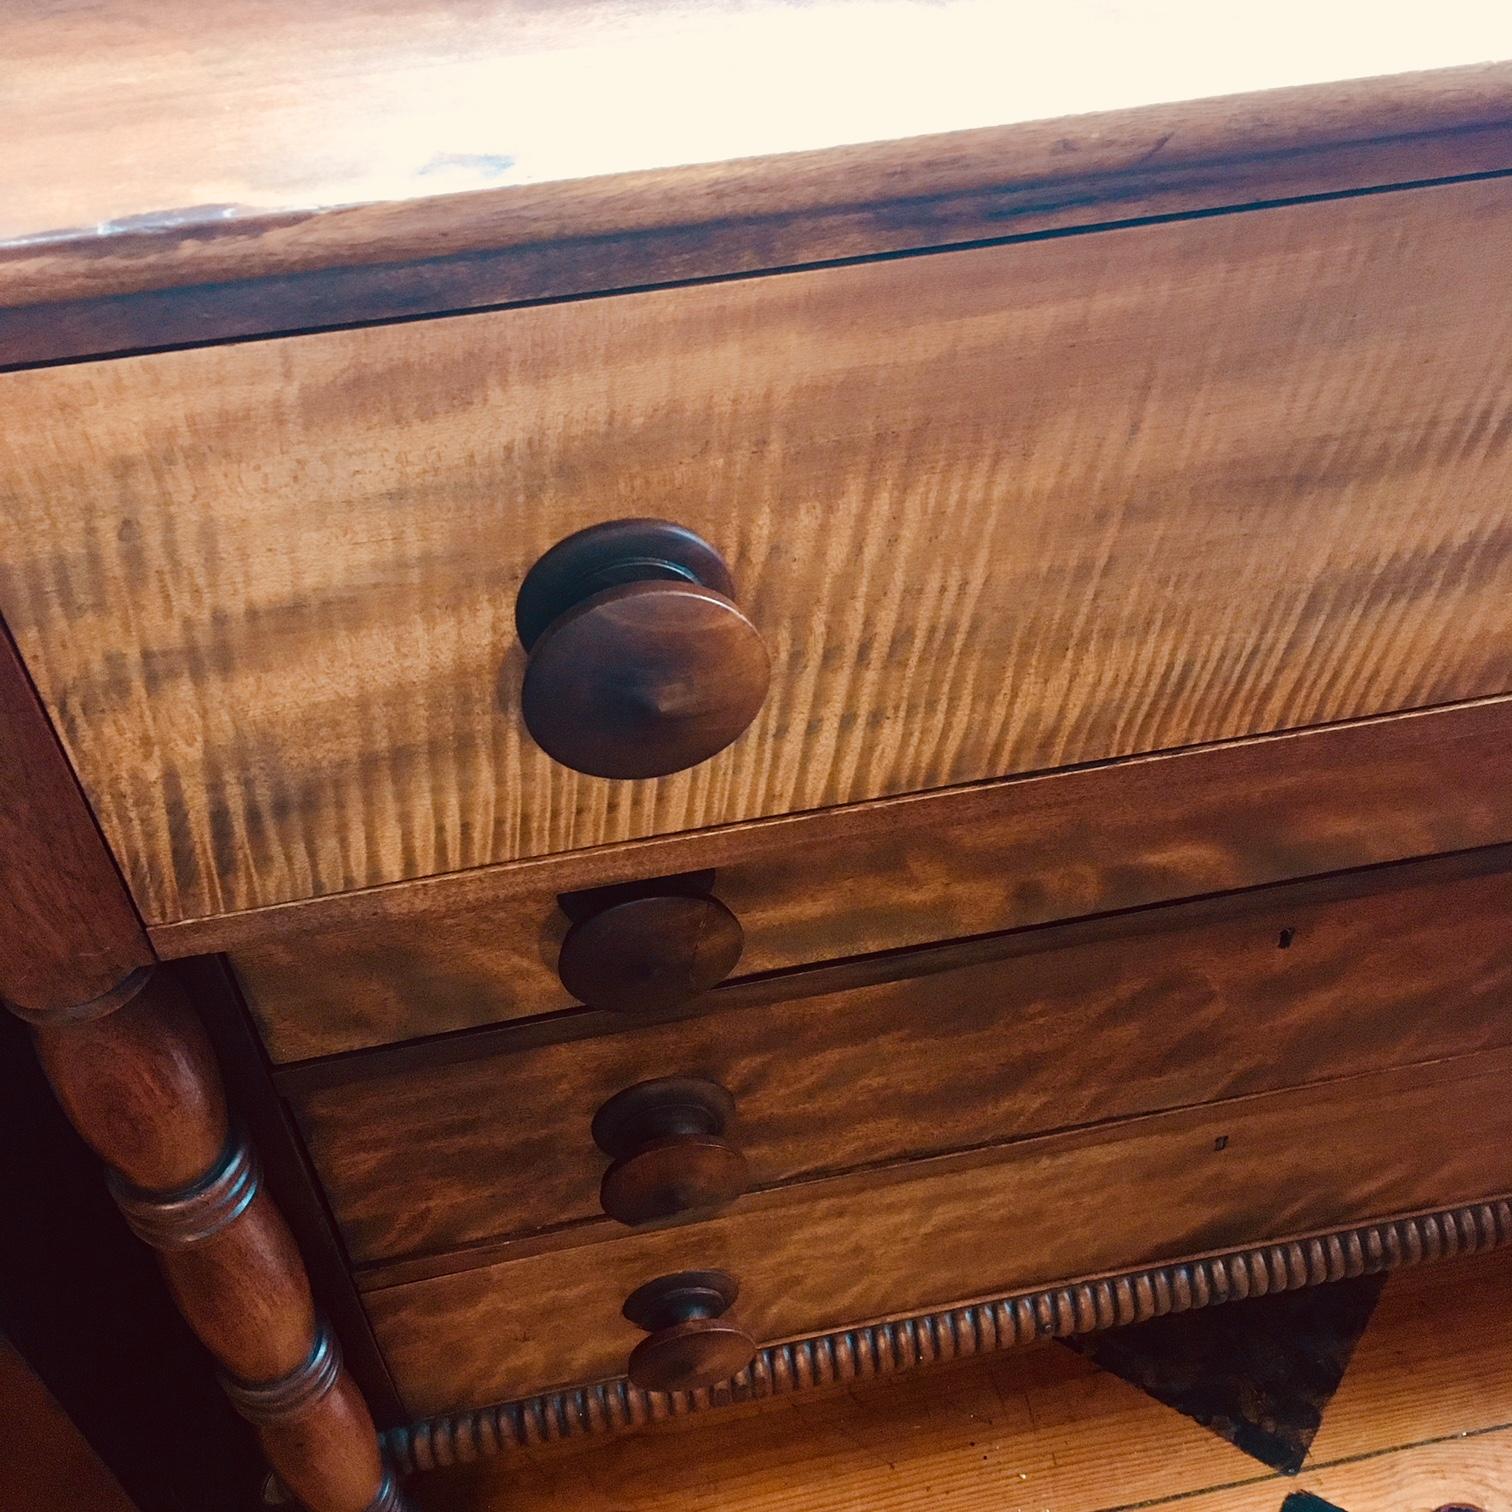 Flame birch or tiger maple chest of drawers from mid-19th century.